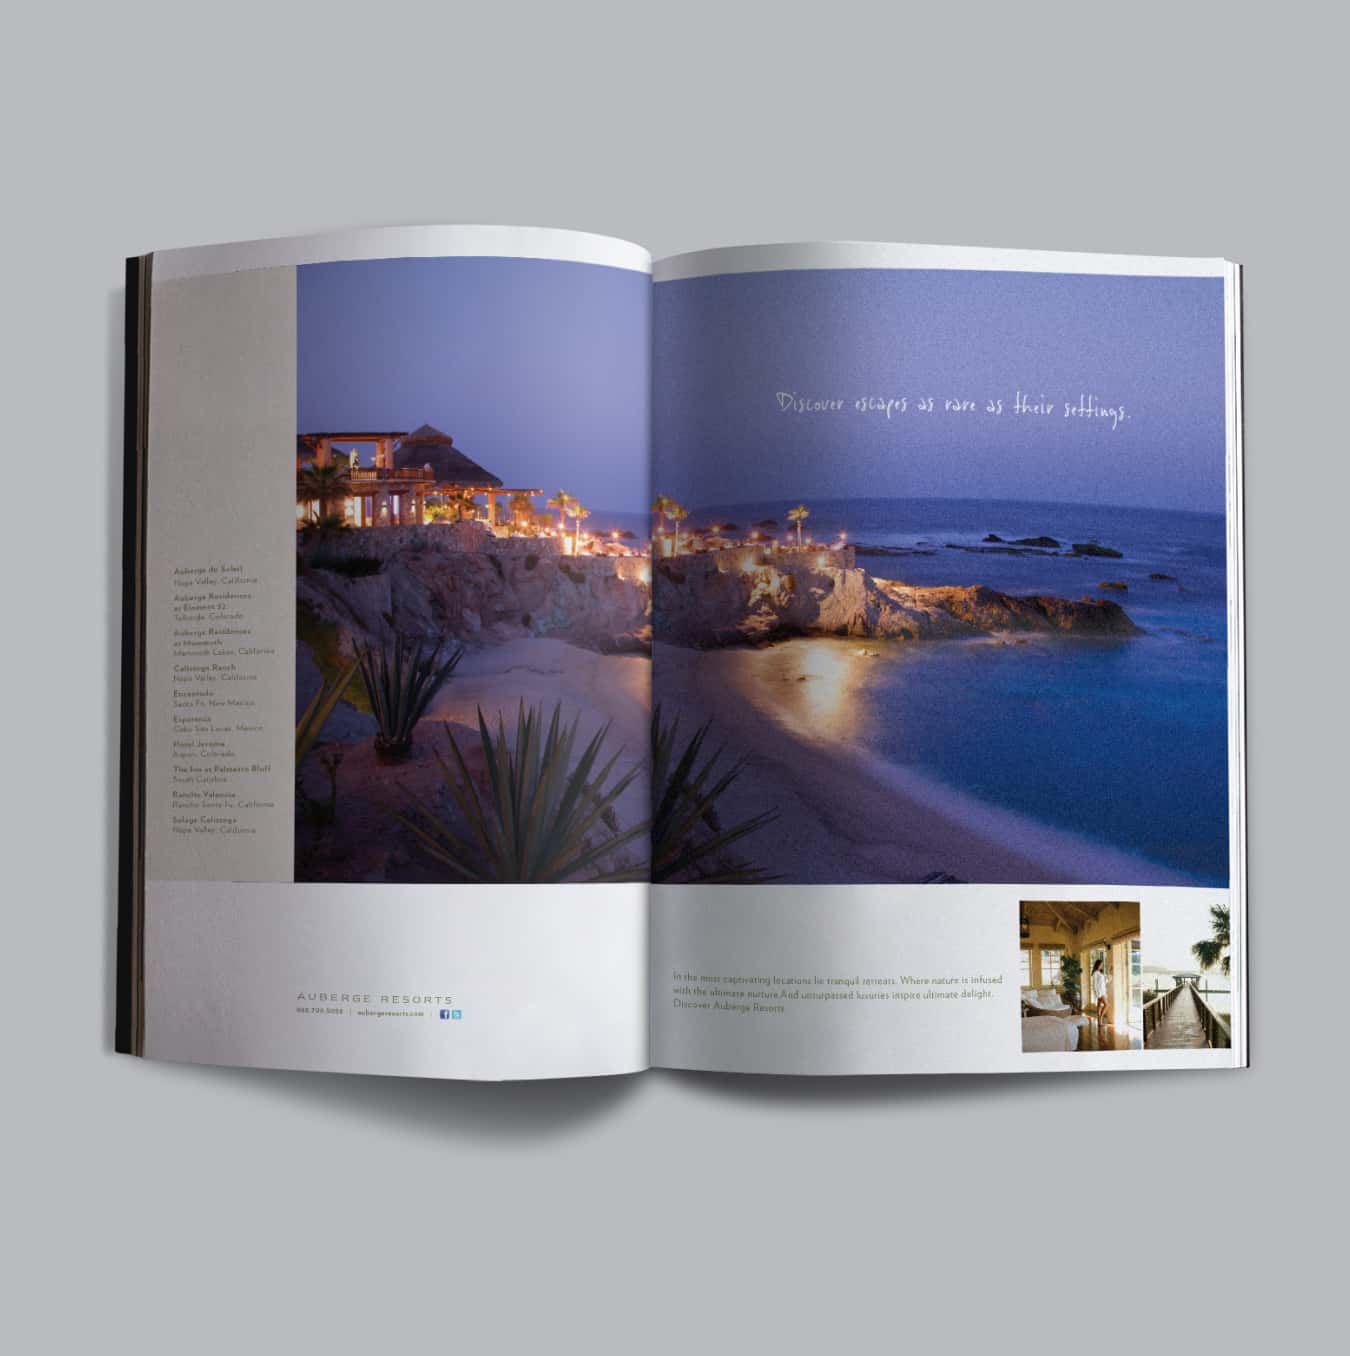 An open magazine spread with a night photo of a coastal resort on the left page and text detailing the experience on the right, captioned 'Ocean escape at an Auberge getaway'.